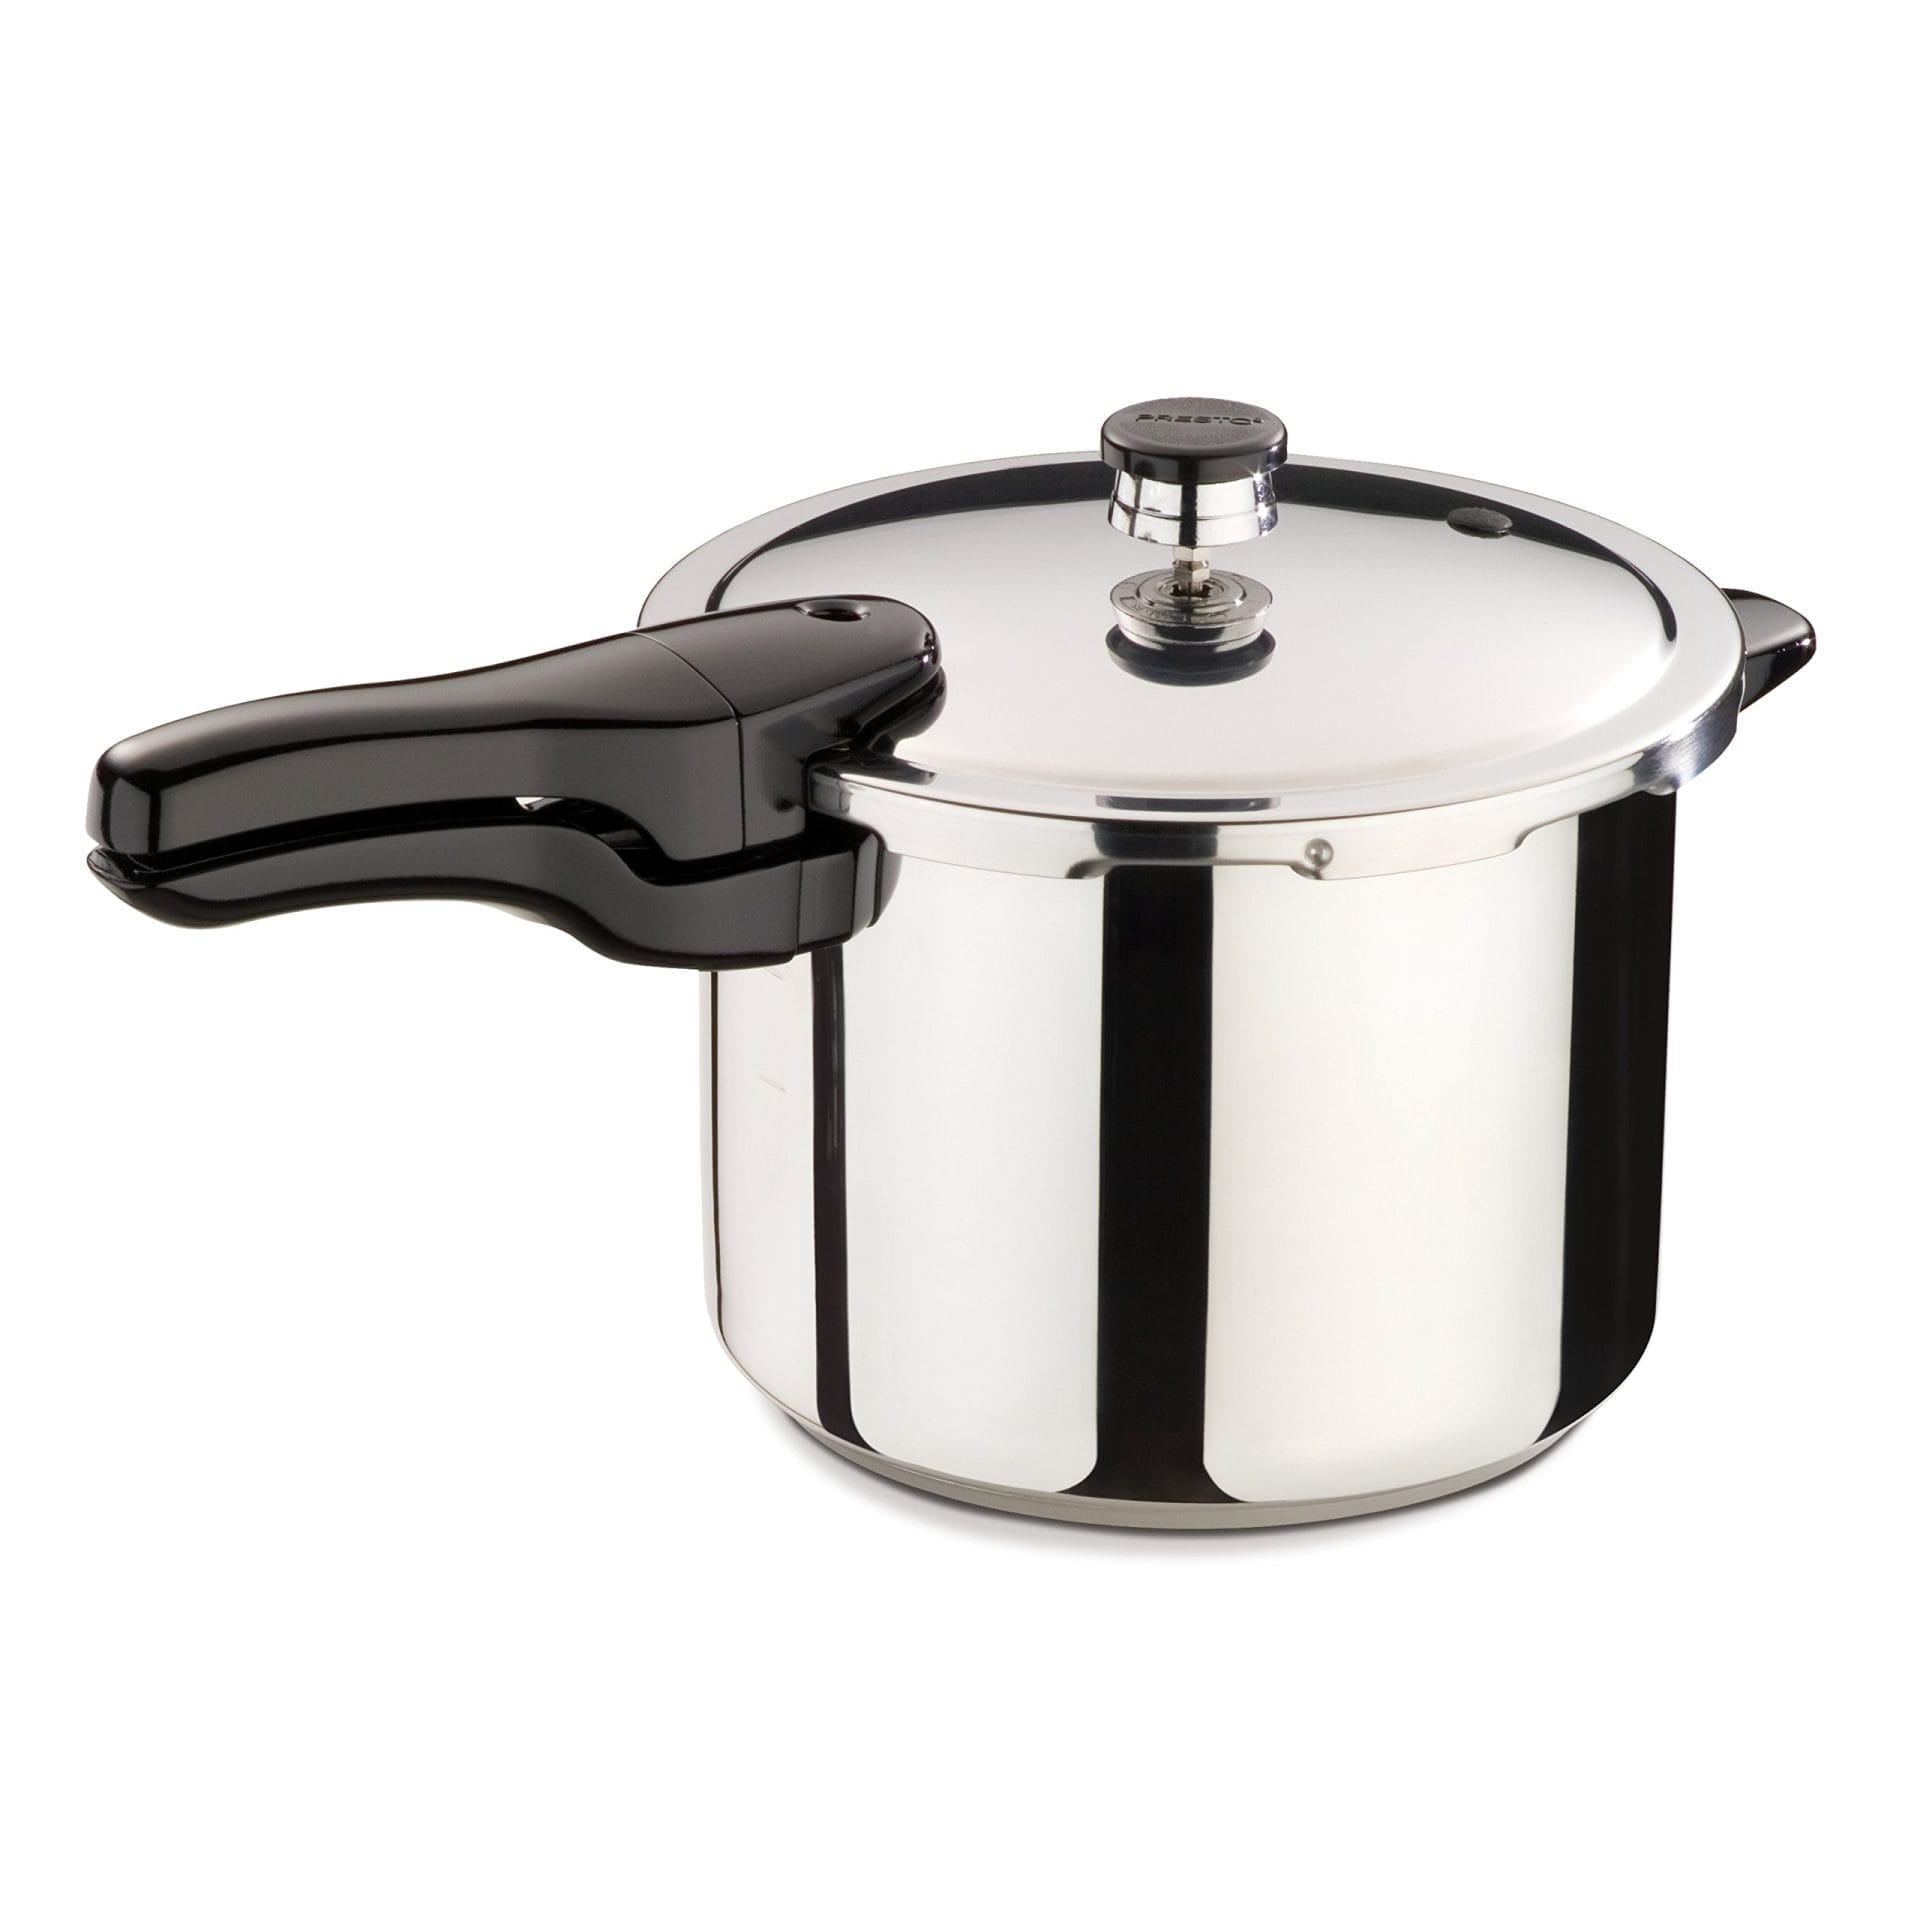 10 best stainless steel pressure cookers tested reviewed 1145 20 1